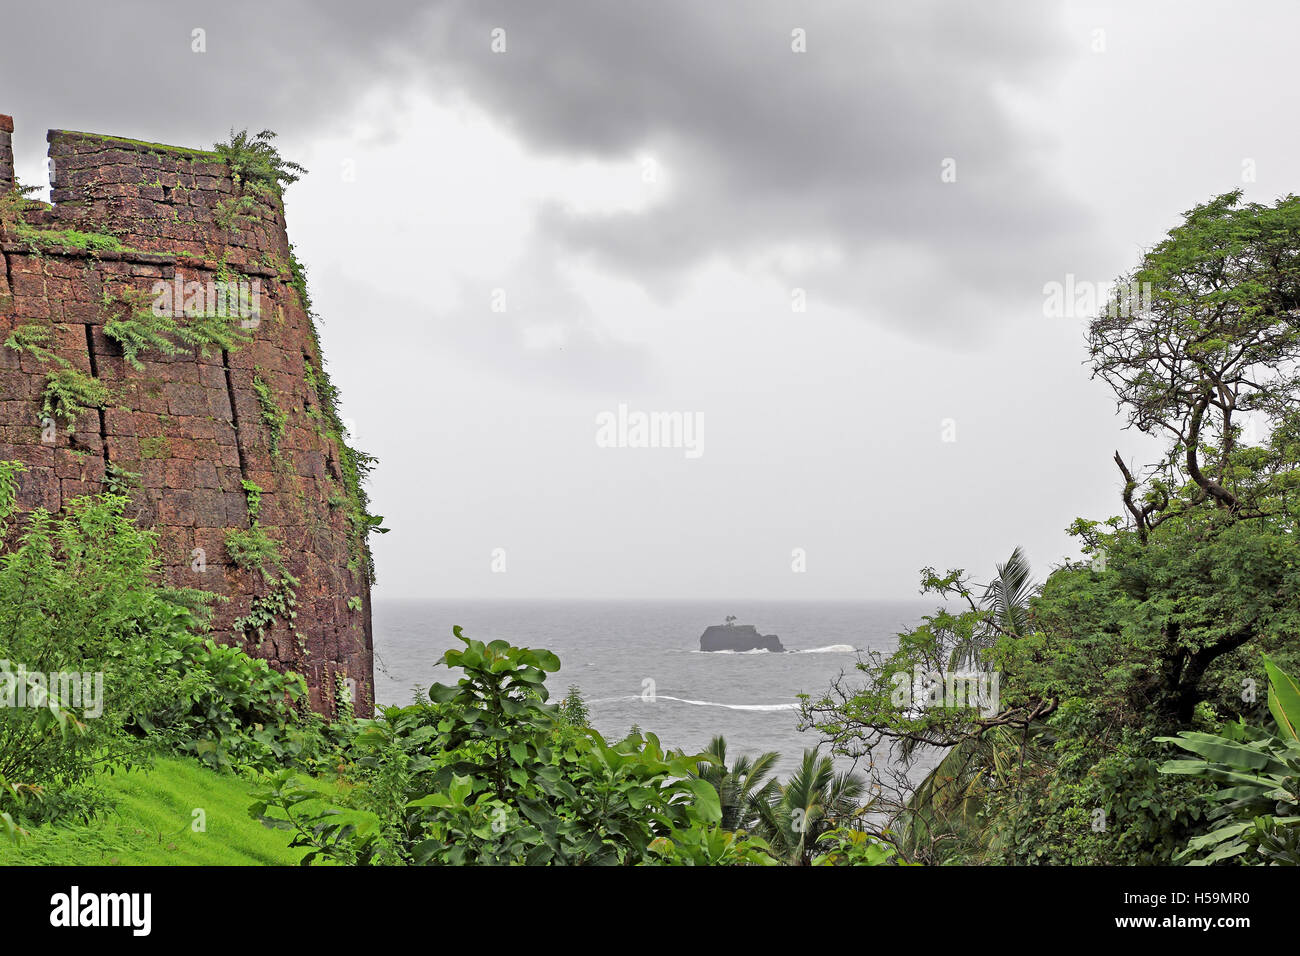 Cabo de Rama Fort turret with sea view in Goa, India. Centuries old fort, built on a cliff on sea coast. Stock Photo